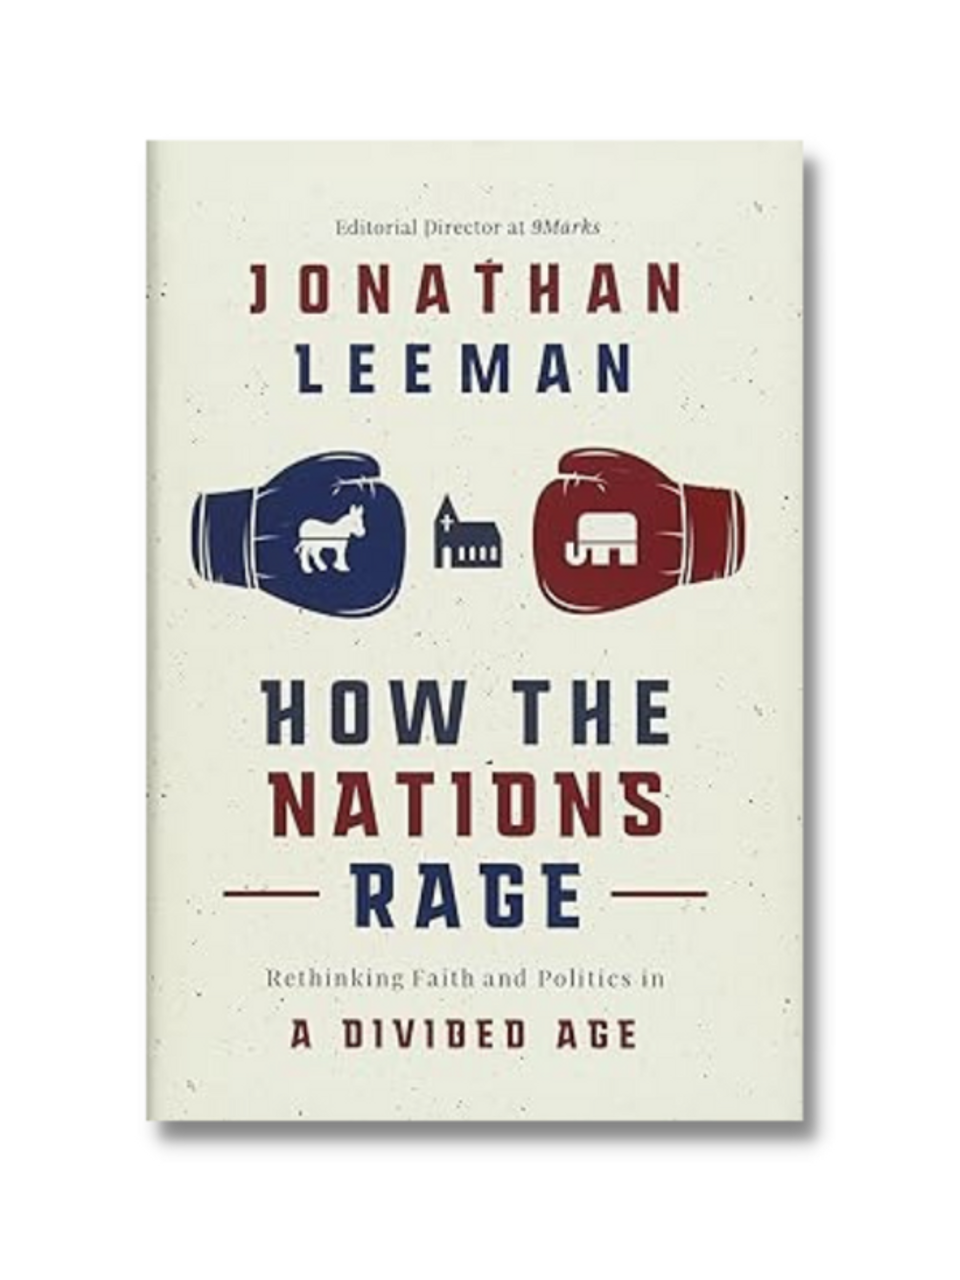 How the Nations Rage: Rethinking Faith and Politics in a Divided Age (Hardcover)